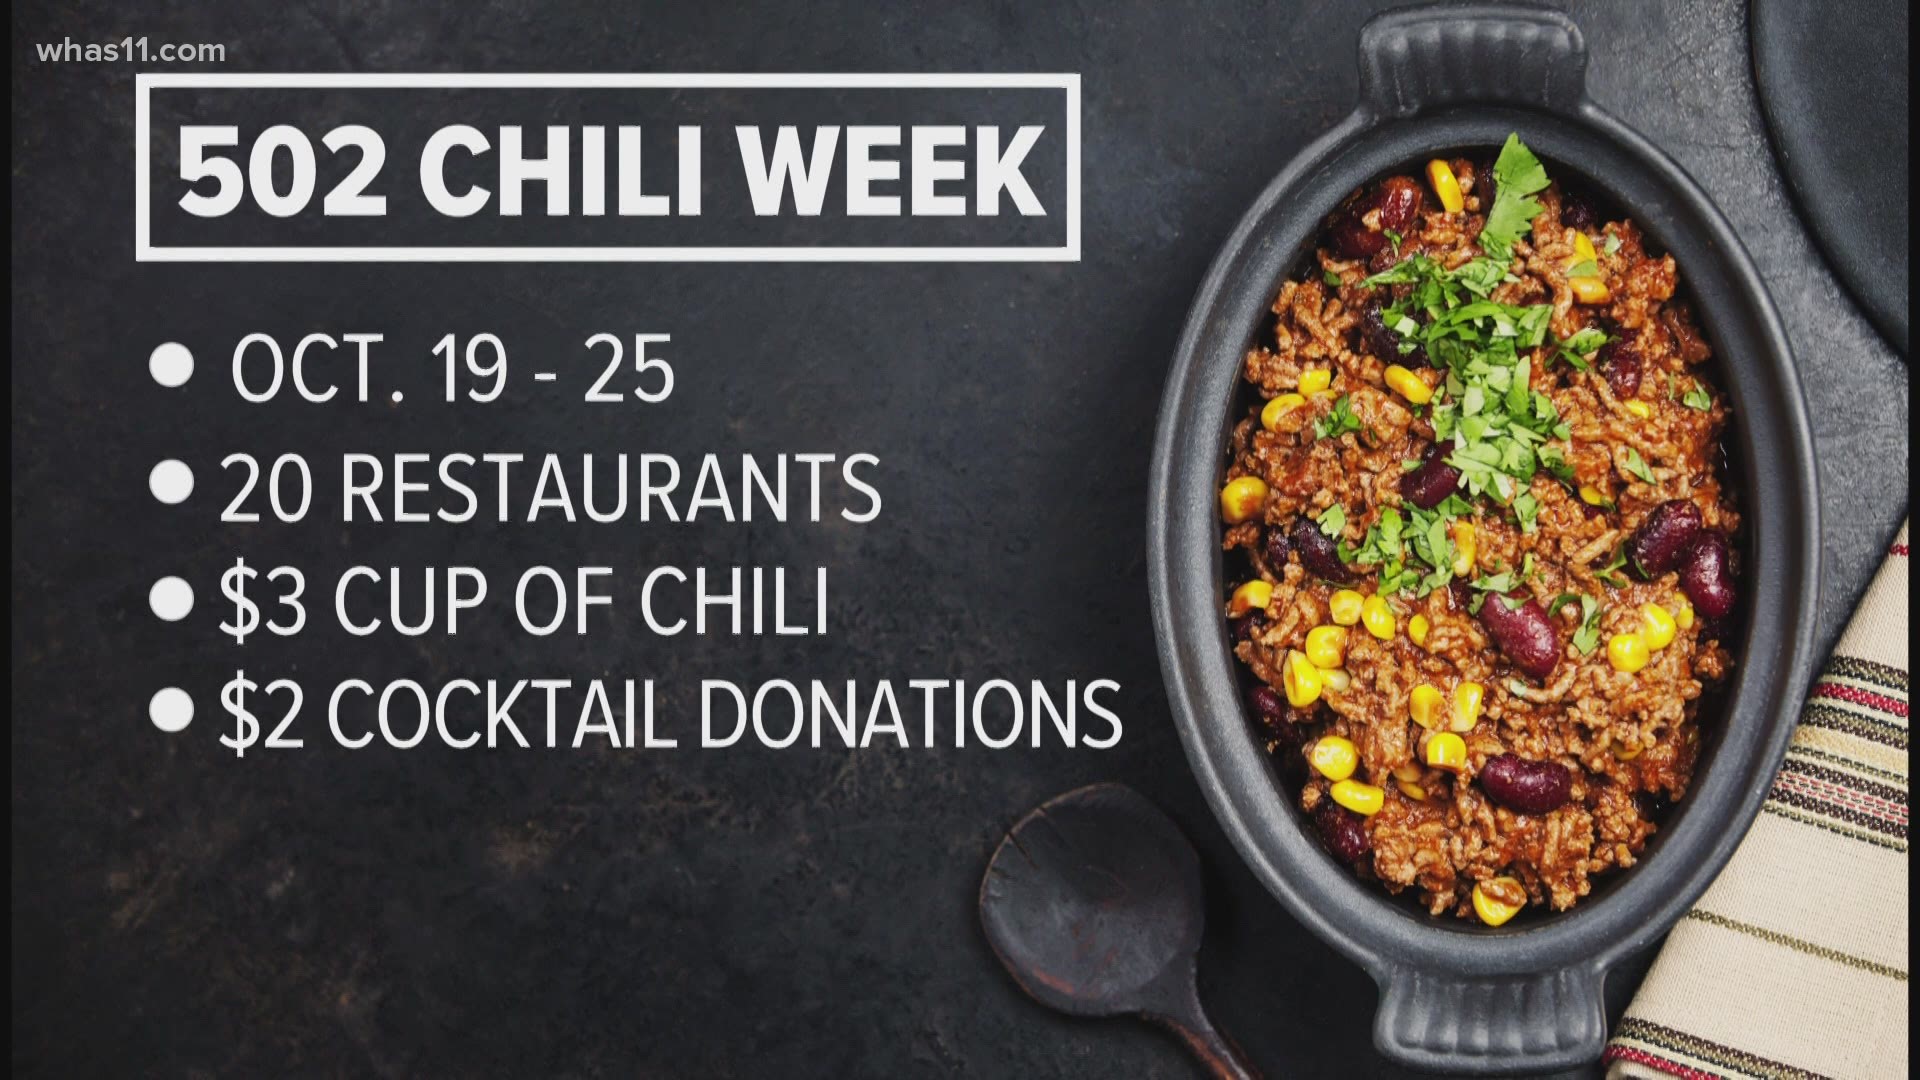 502 Chili Week in Louisville: Where to find $3 cups of chili | 0